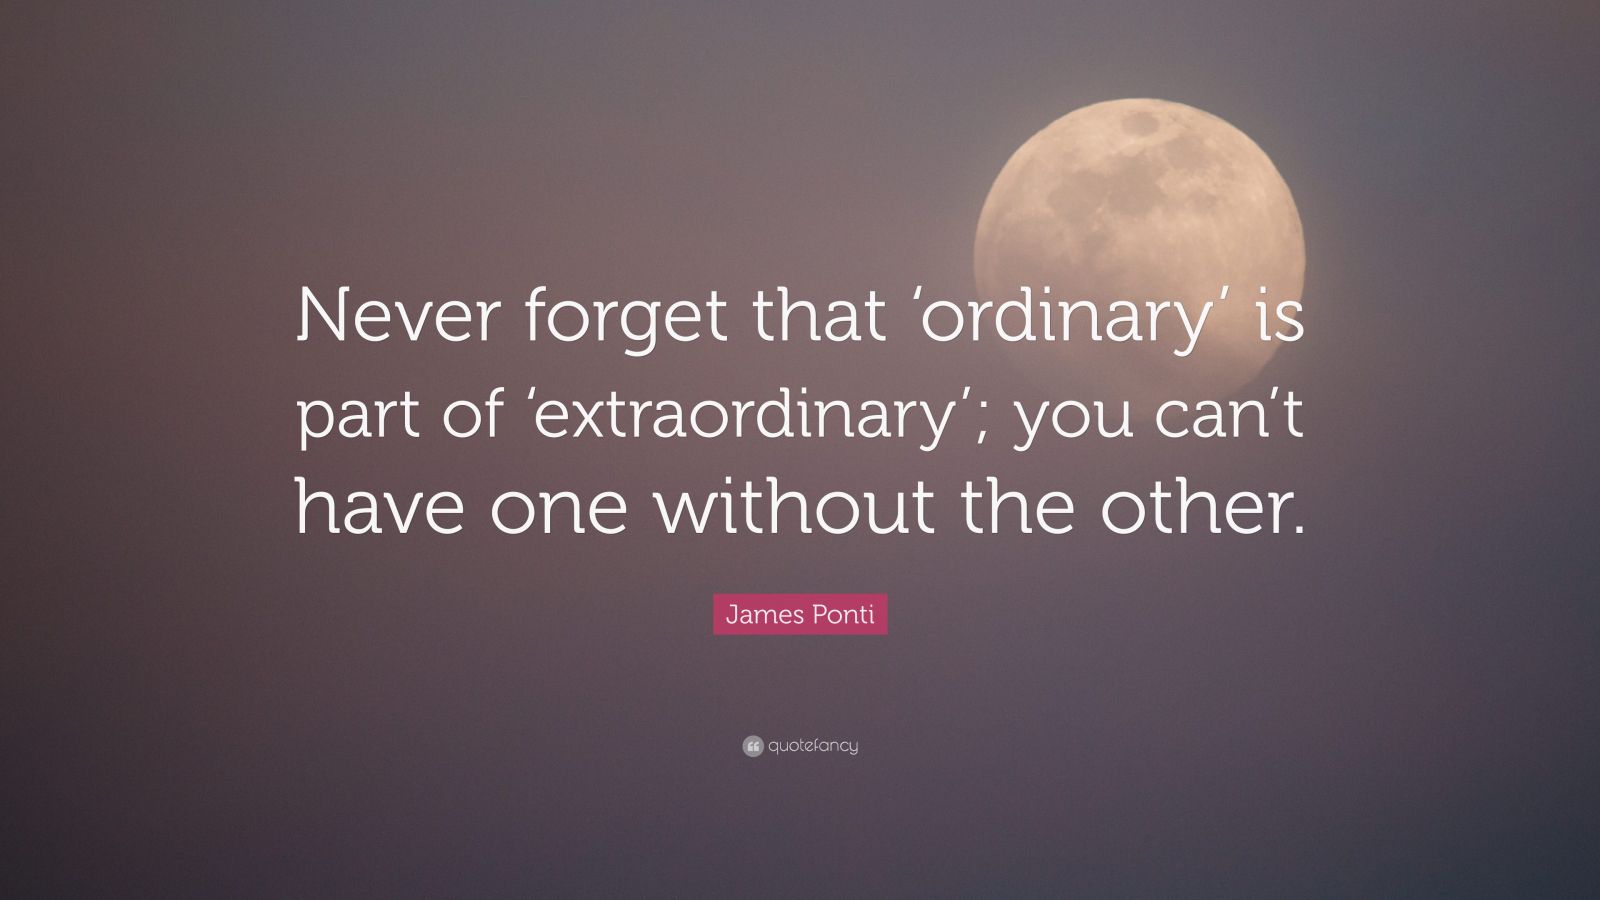 James Ponti Quote: “Never forget that ‘ordinary’ is part of ...